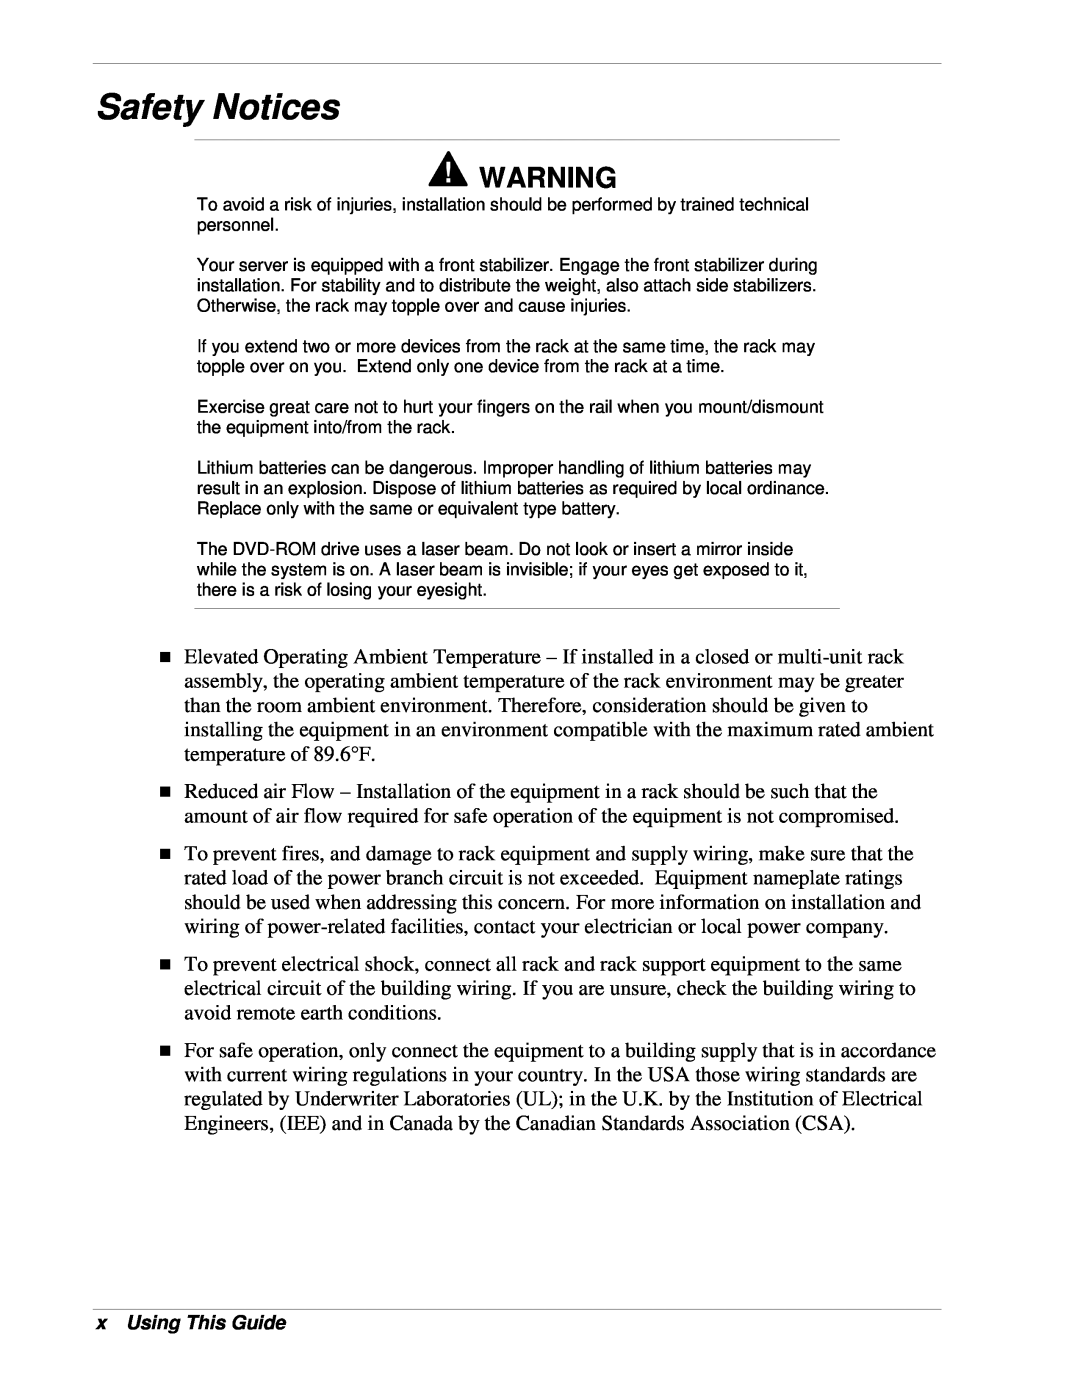 NEC 1080Xd manual Safety Notices, x Using This Guide 